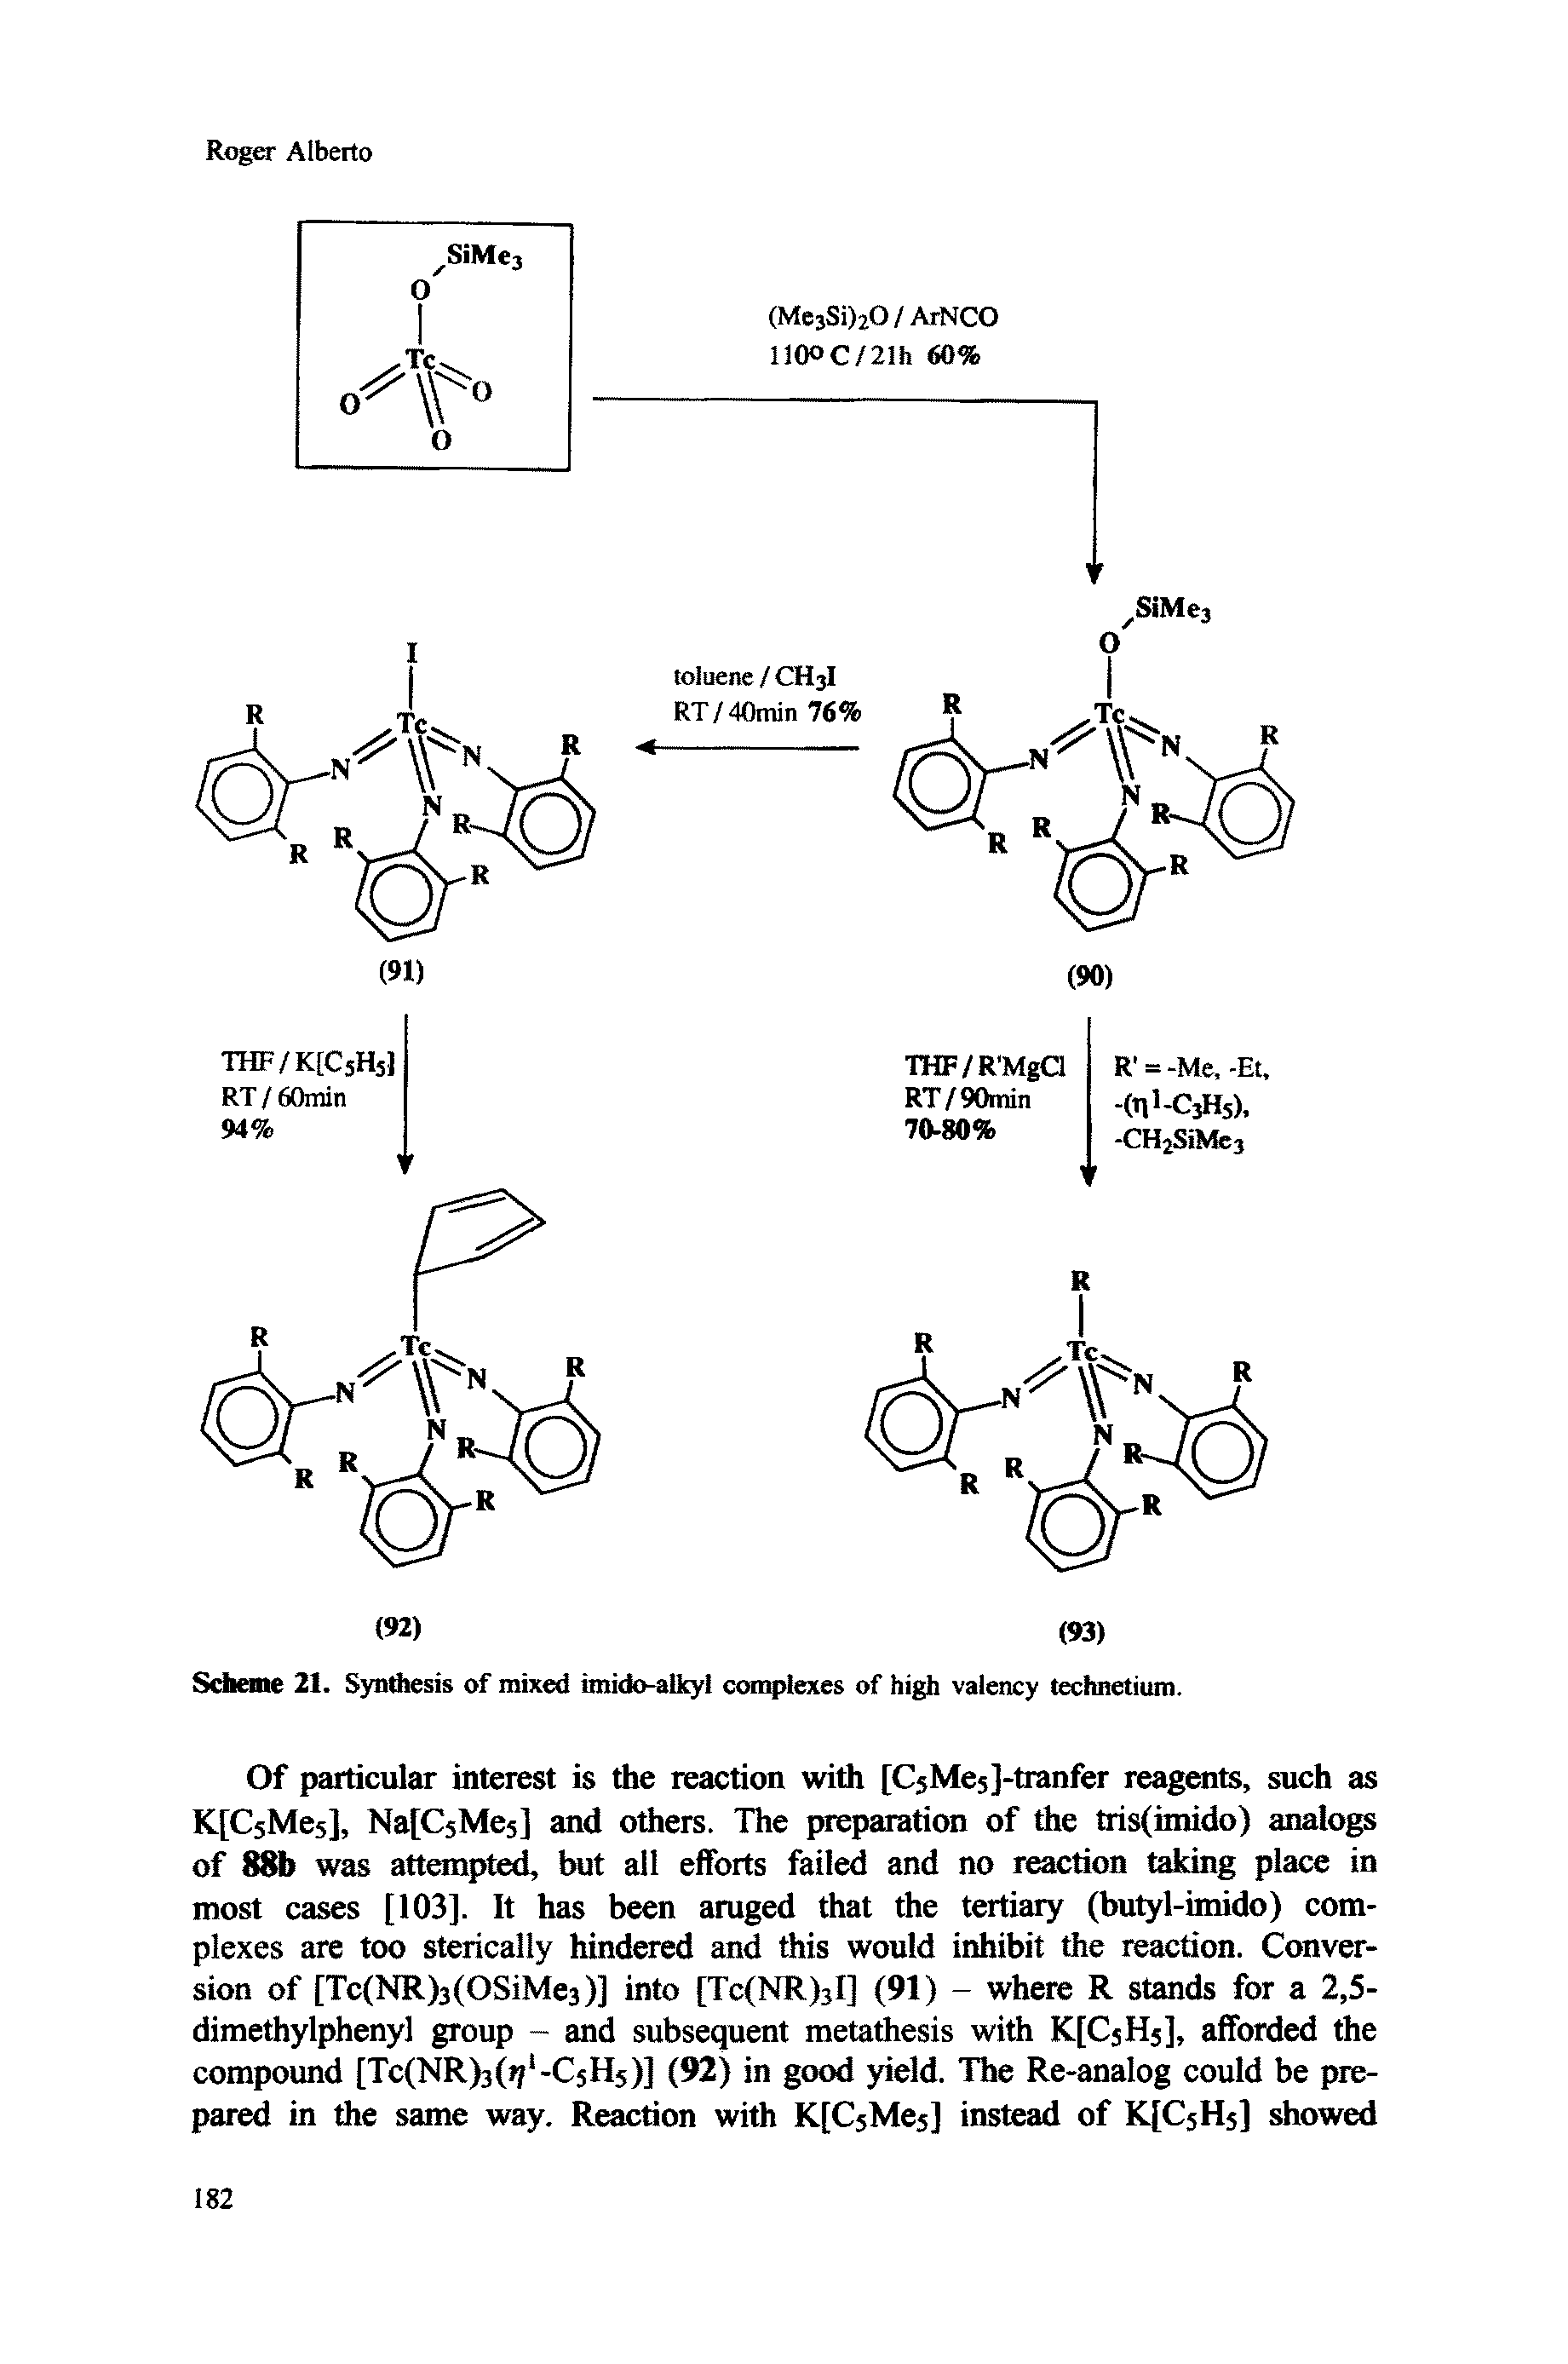 Scheme 21. Synthesis of mixed imido-aikyi complexes of high valency technetium.